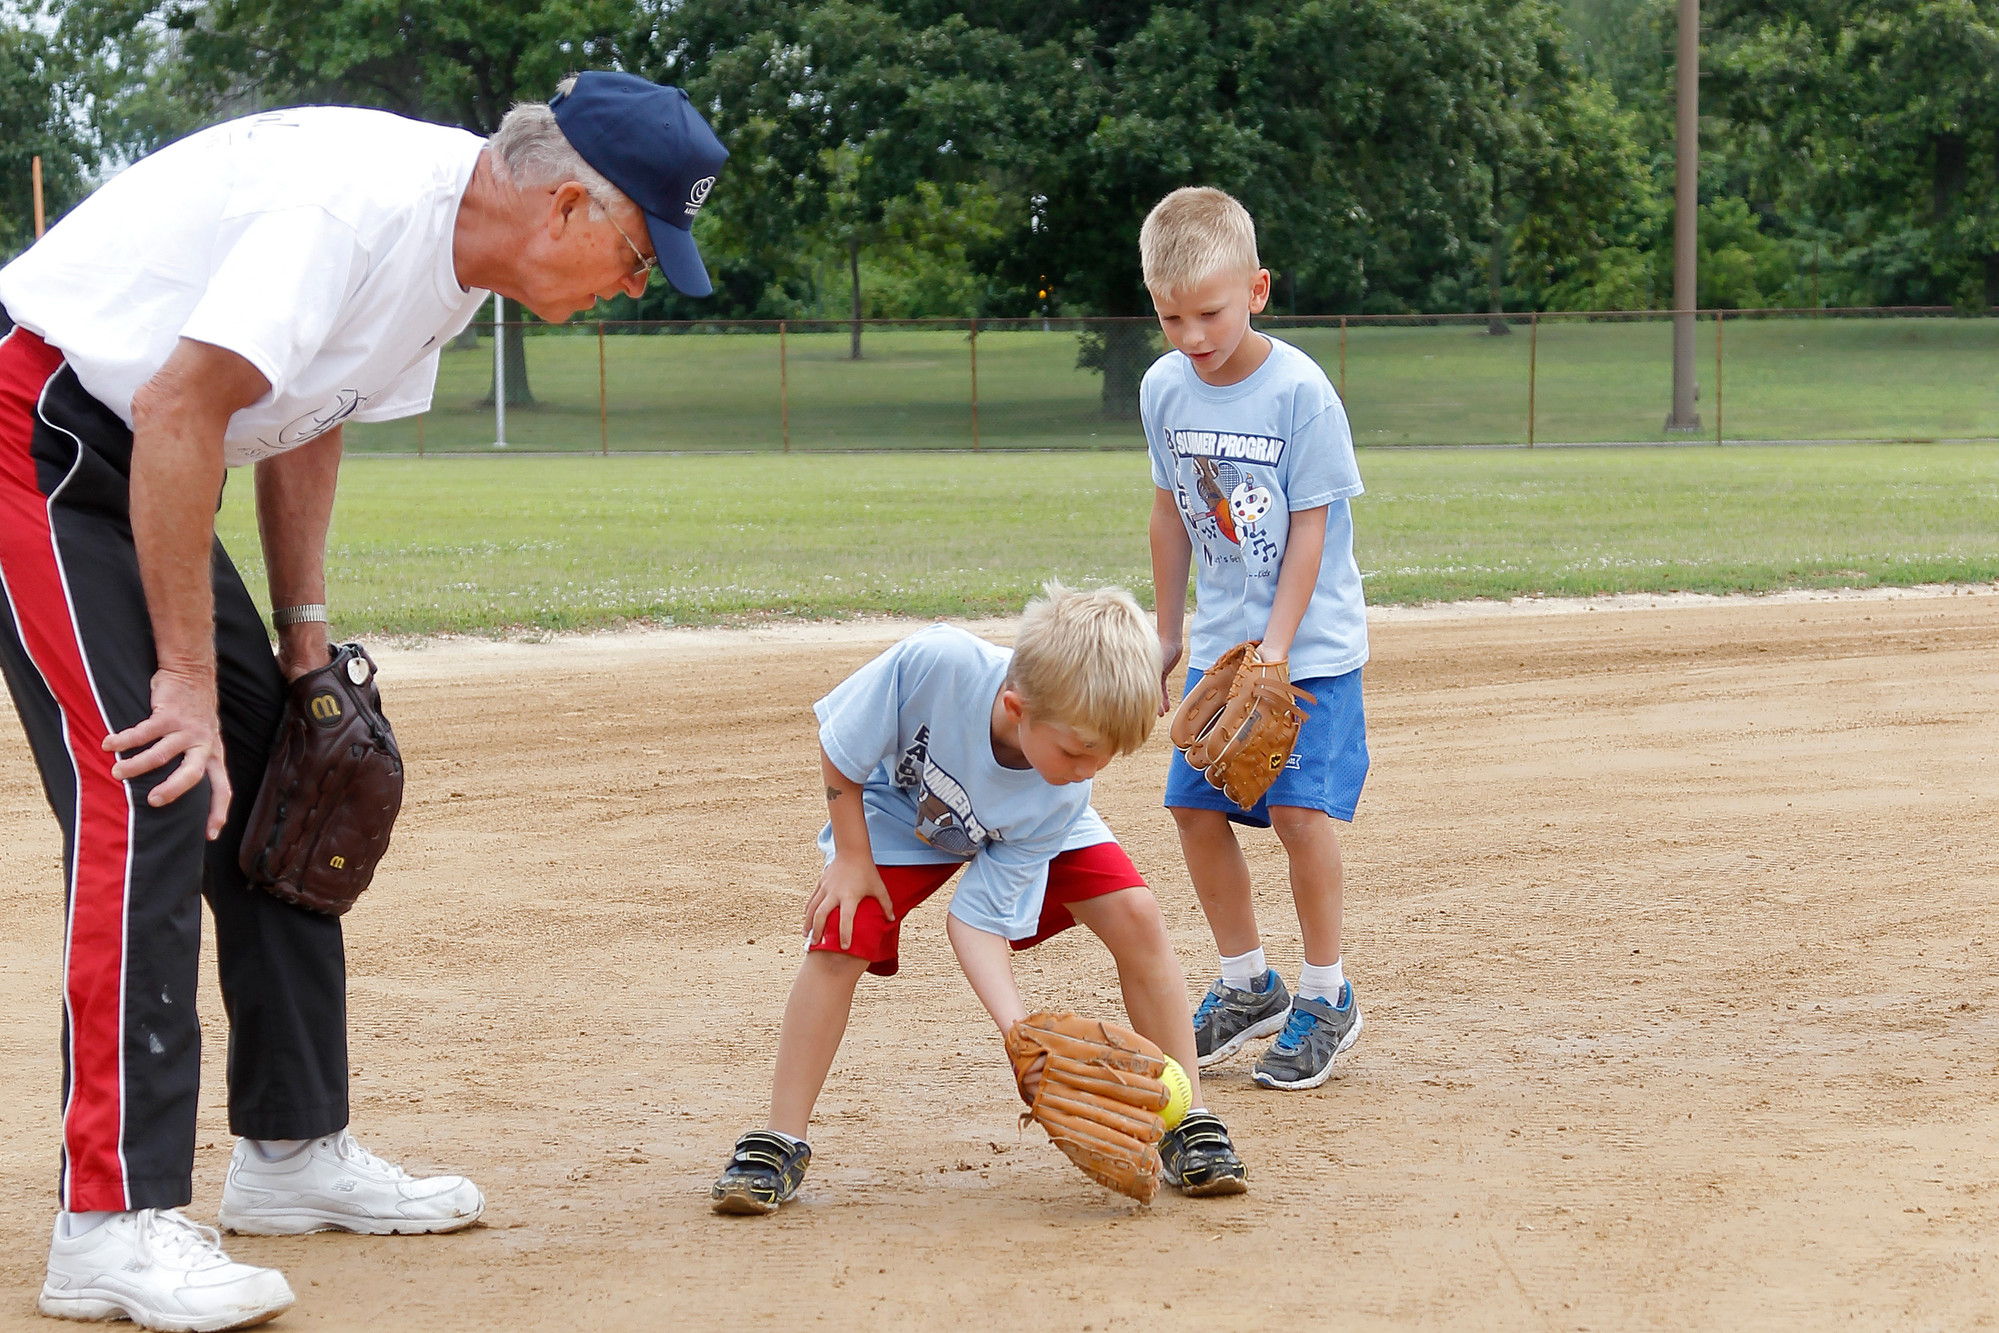 LISSA member Rod Ducasse, from Levittown, watched as  7-year-old Jacob Stevenson fielded a ground ball.